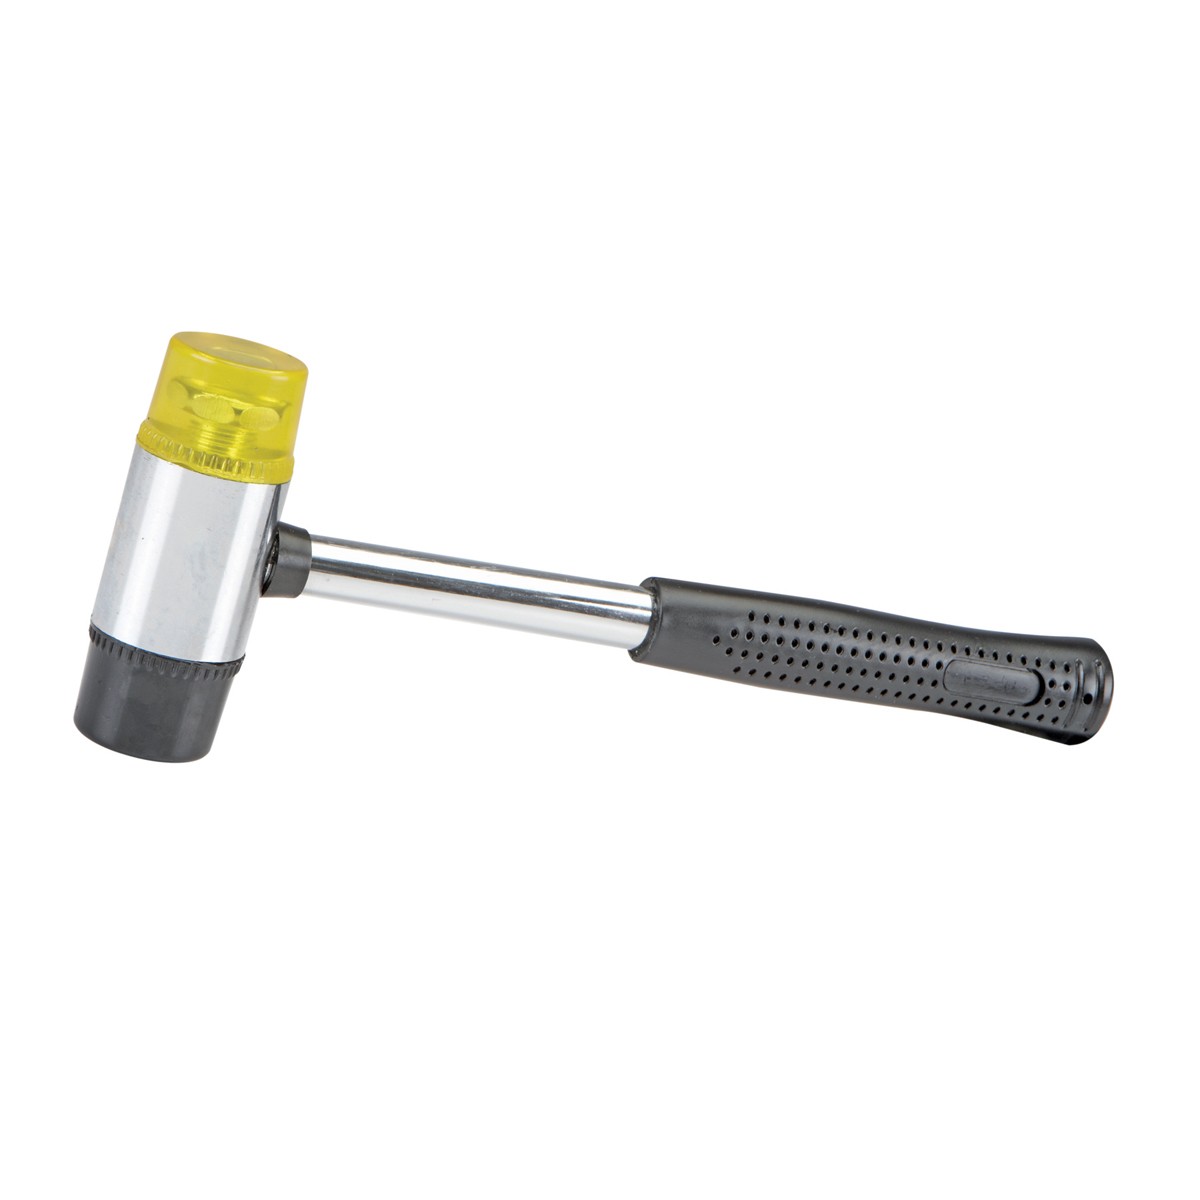 New   Pittsburgh  1-1/2 lb. Soft Face Mallet